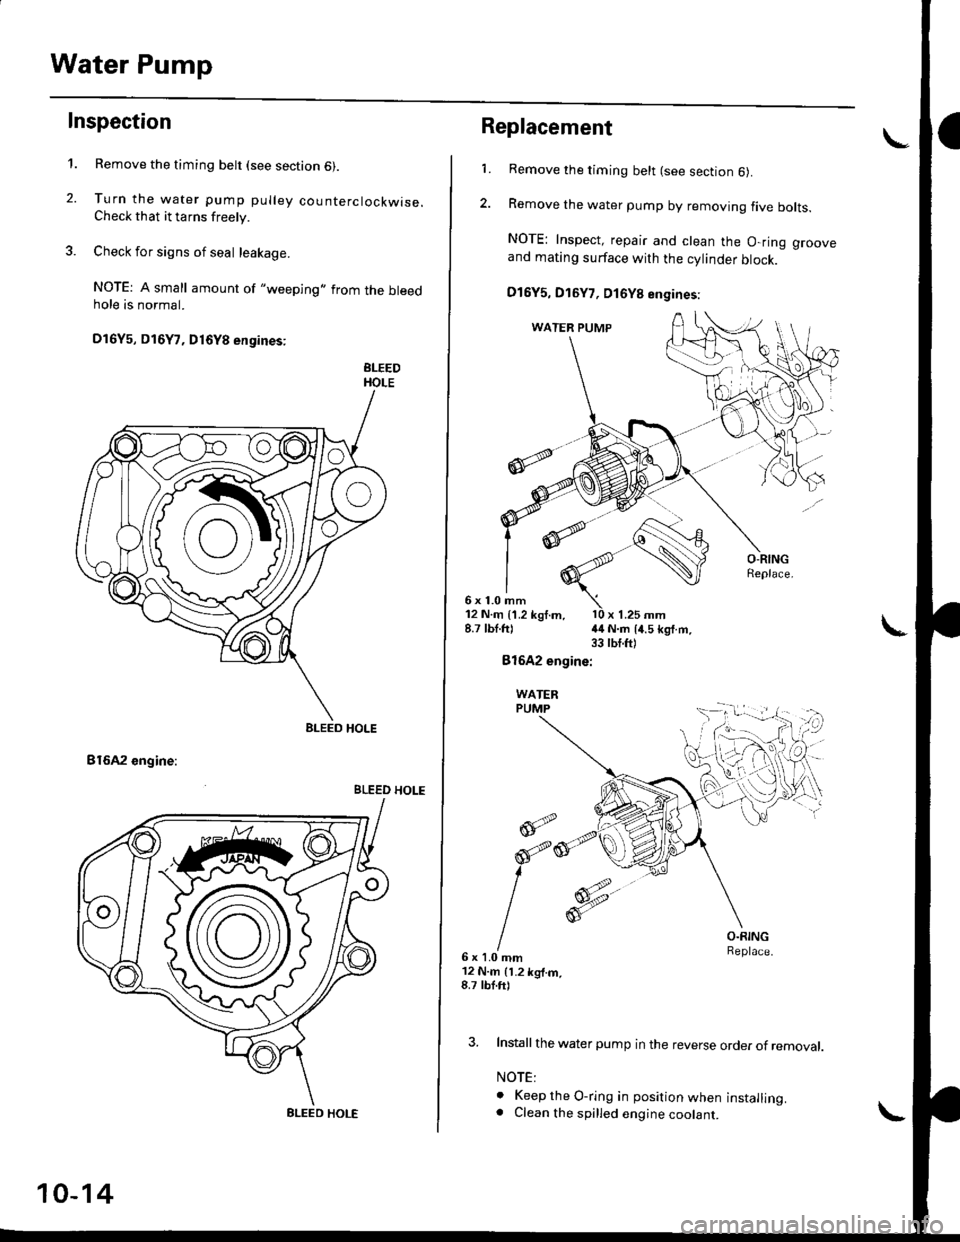 HONDA CIVIC 1998 6.G Workshop Manual Water Pump
Inspection
t.
2.
Remove the timing belt (see section 6).
Turn the water pump pulley counterclockwise.Check that it tarns freely.
Check for signs of seal leakage.
NOTE: A small amount of "w